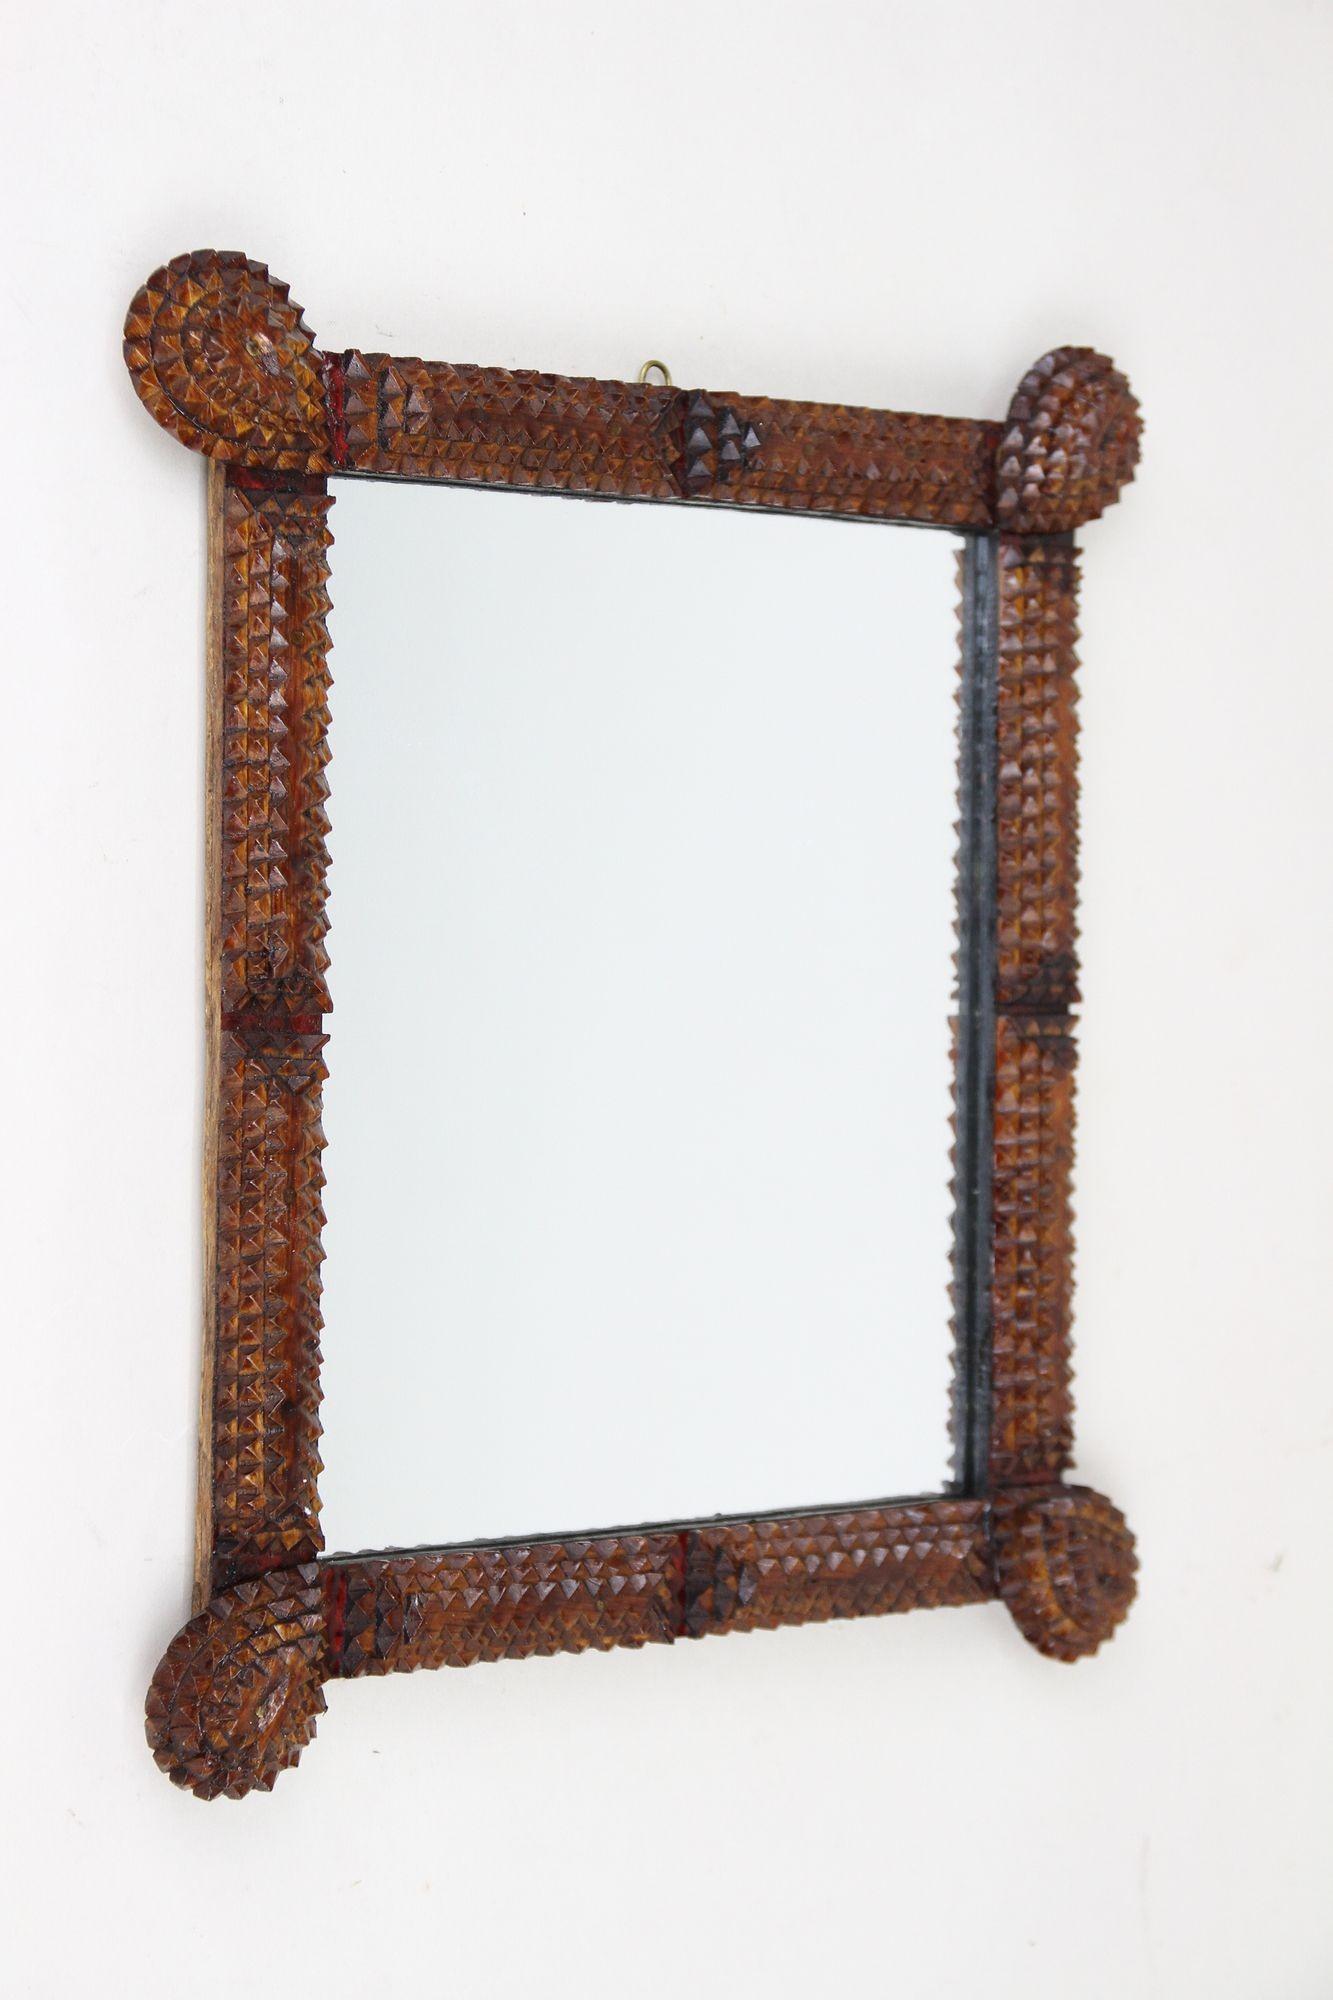 Rustic Pair of Small Tramp Art Wall Mirrors, Handcarved, Austria ca. 1870